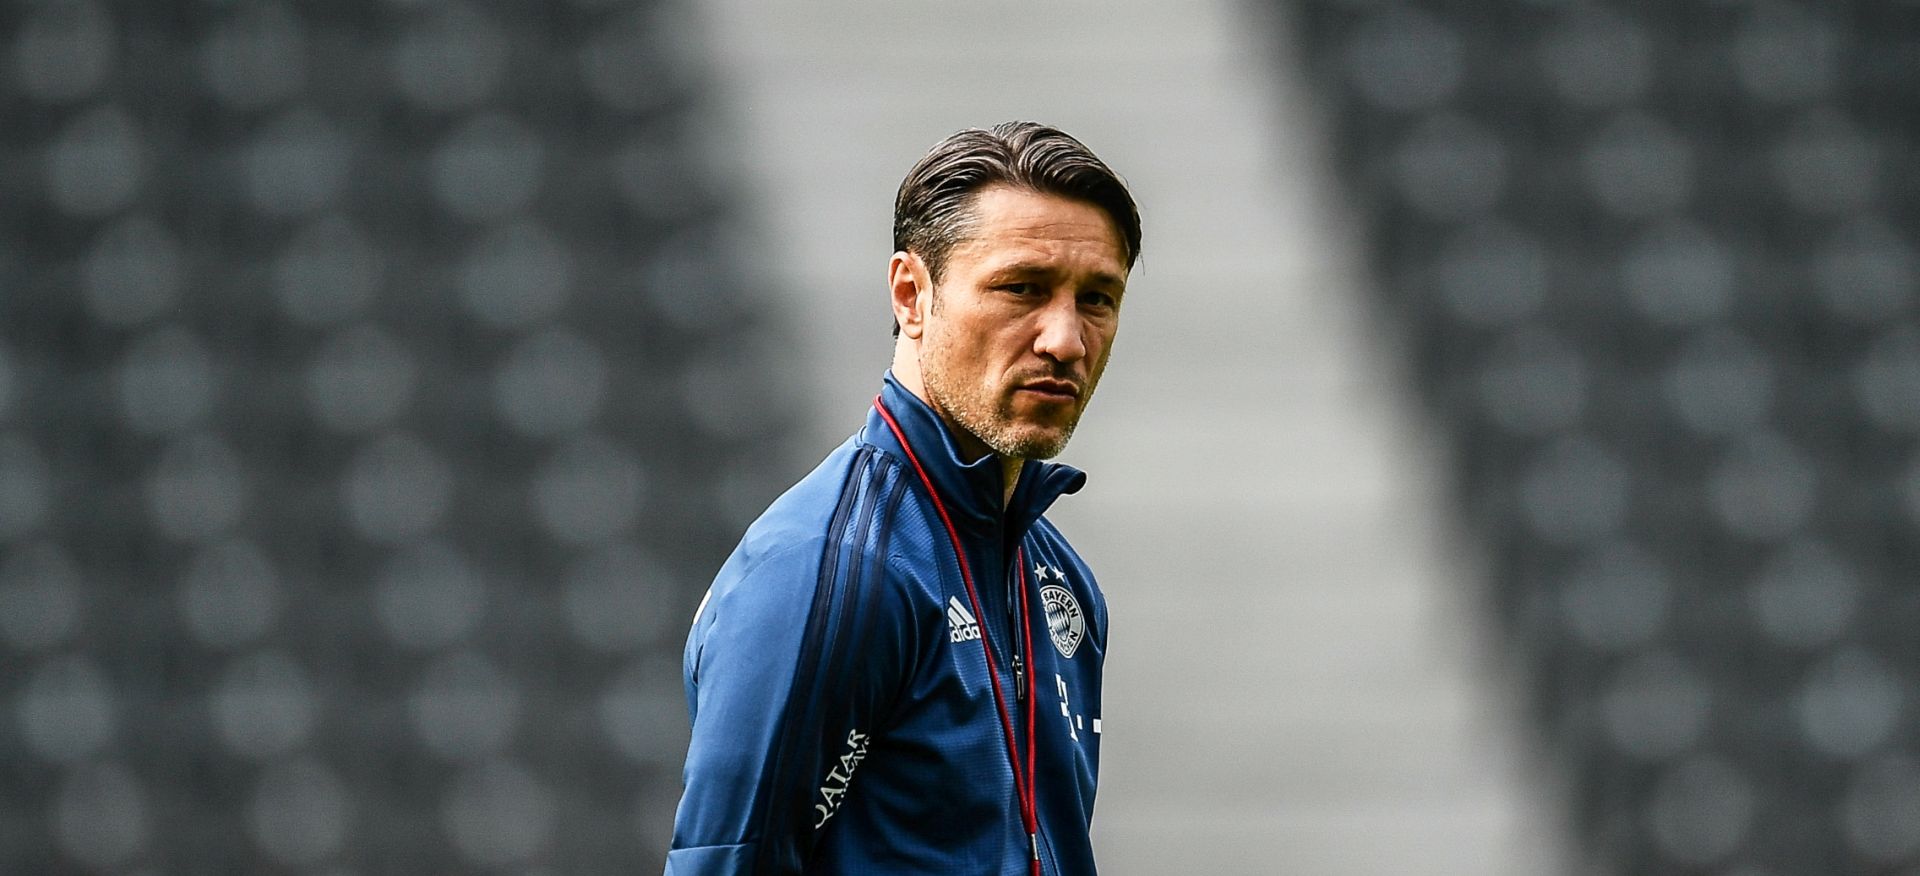 epa07597574 Bayern Munich's head coach Niko Kovac leads his team's training session at the Olympic Stadium in Berlin, Germany, 24 May 2019. FC Bayern Munich will face RB Leipzig in their German DFB Cup final soccer match on 25 May 2019 in Berlin.  EPA/FILIP SINGER CONDITIONS - ATTENTION: The DFB regulations prohibit any use of photographs as image sequences and/or quasi-video.